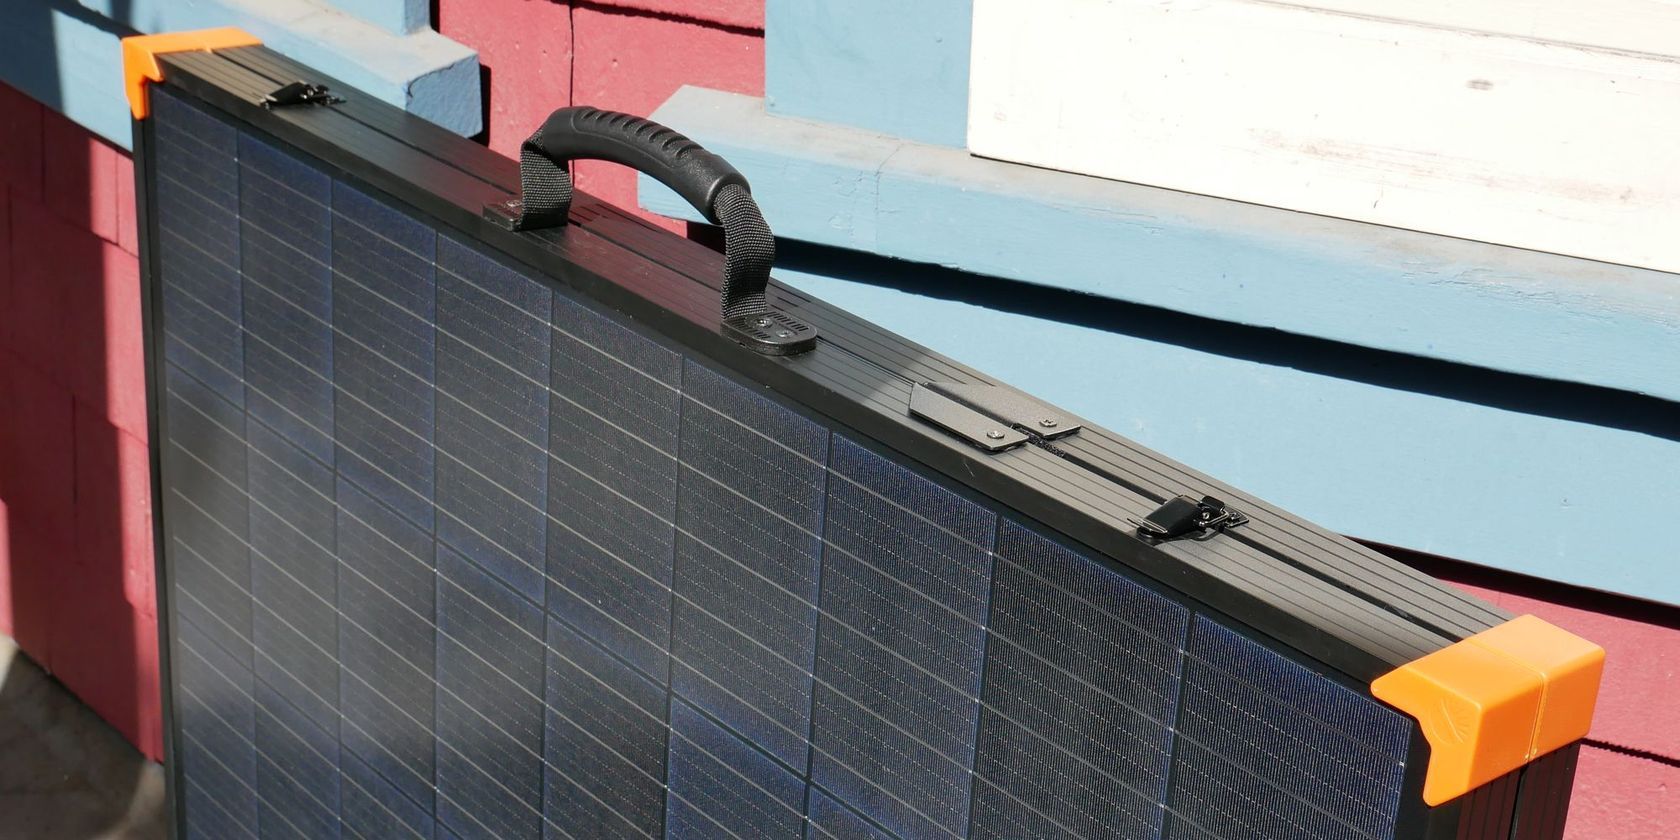 FlexSolar Briefcase Solar Panel Sideview Featured Image